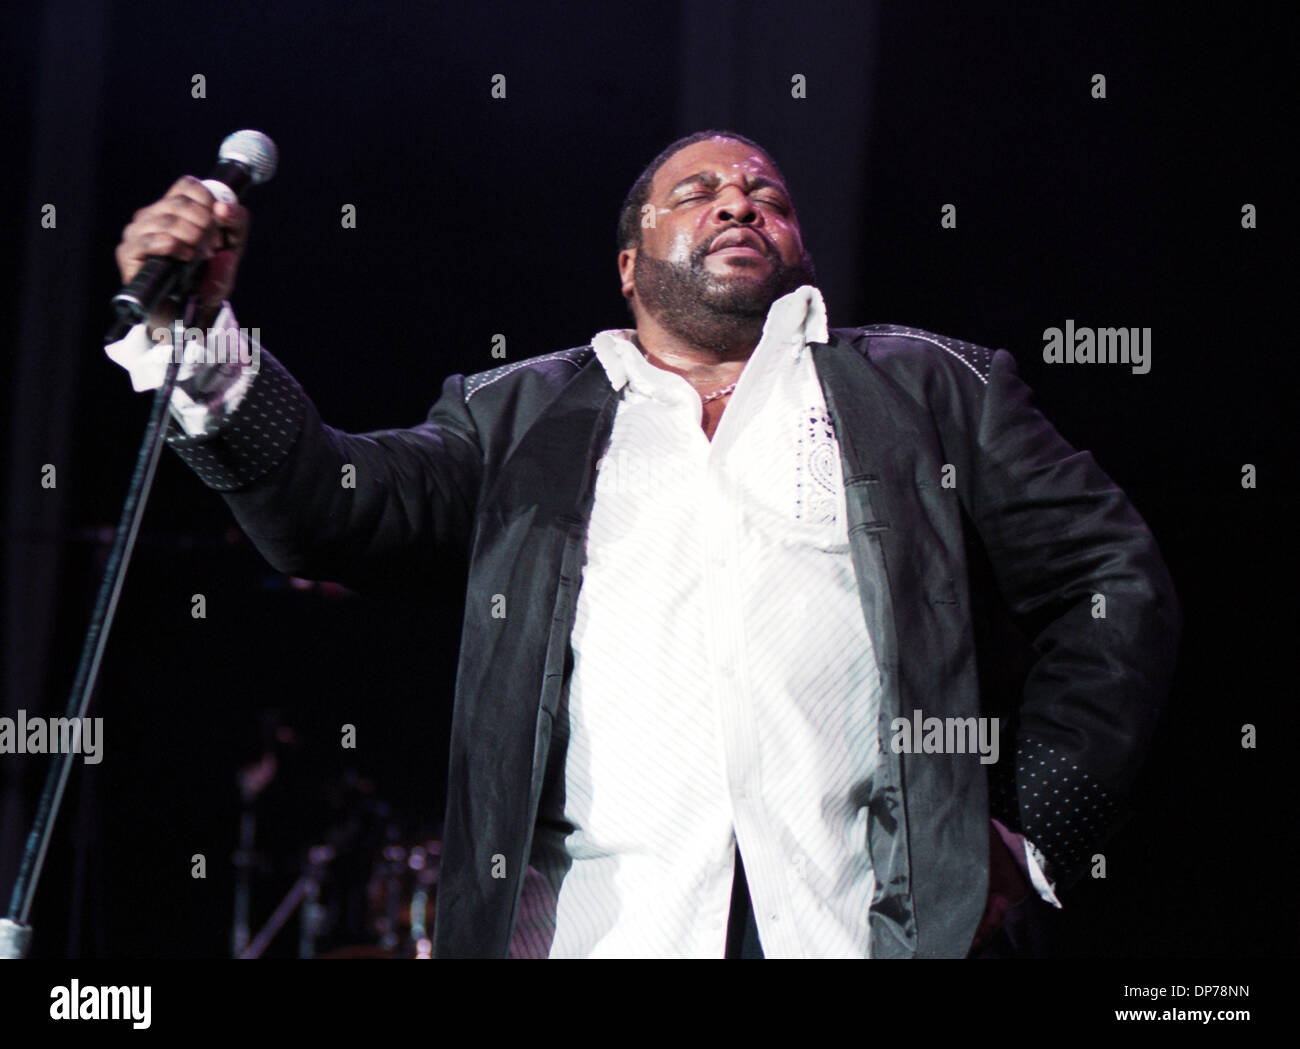 Nov 10, 2006; Raleigh, North Carolina, USA; Singer GERALD LEVERT the R&B singer whose hits included 'I Swear' and 'I'd Give Anything,' as well as chart-toppers with the groups LeVert and LSG, has died, according to his label, Atlantic Records. He was 40. Levert died of a heart attack Friday at his Cleveland, Ohio, home, according a statement from Atlantic. Seen performing live at A Stock Photo